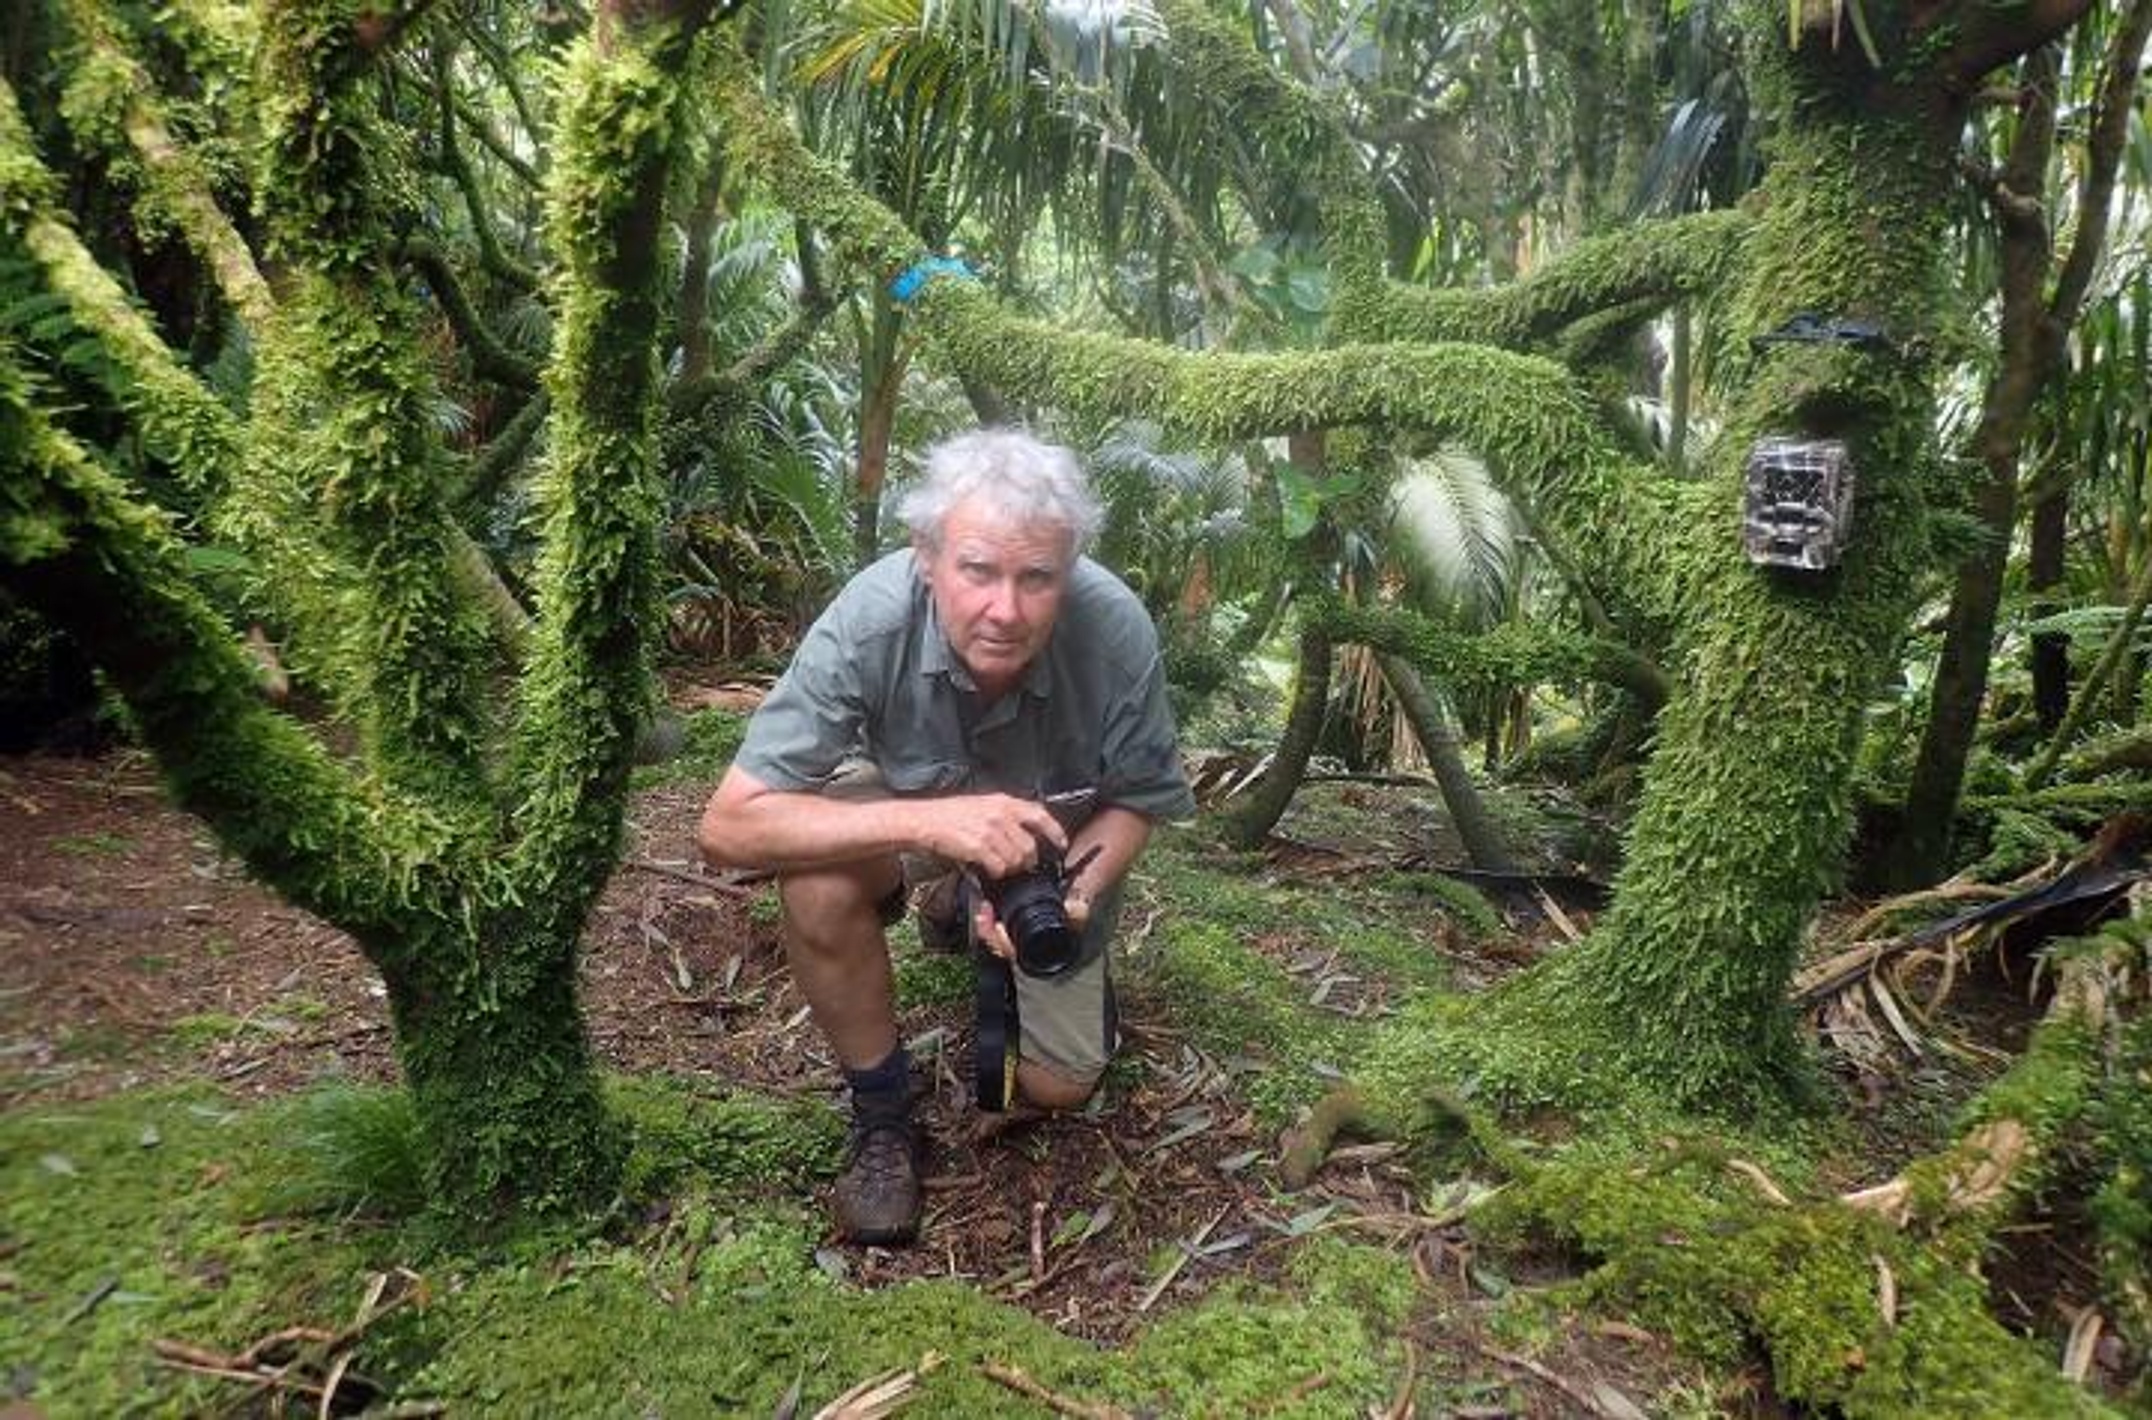 Man holding a camera squatting down in a rainforest